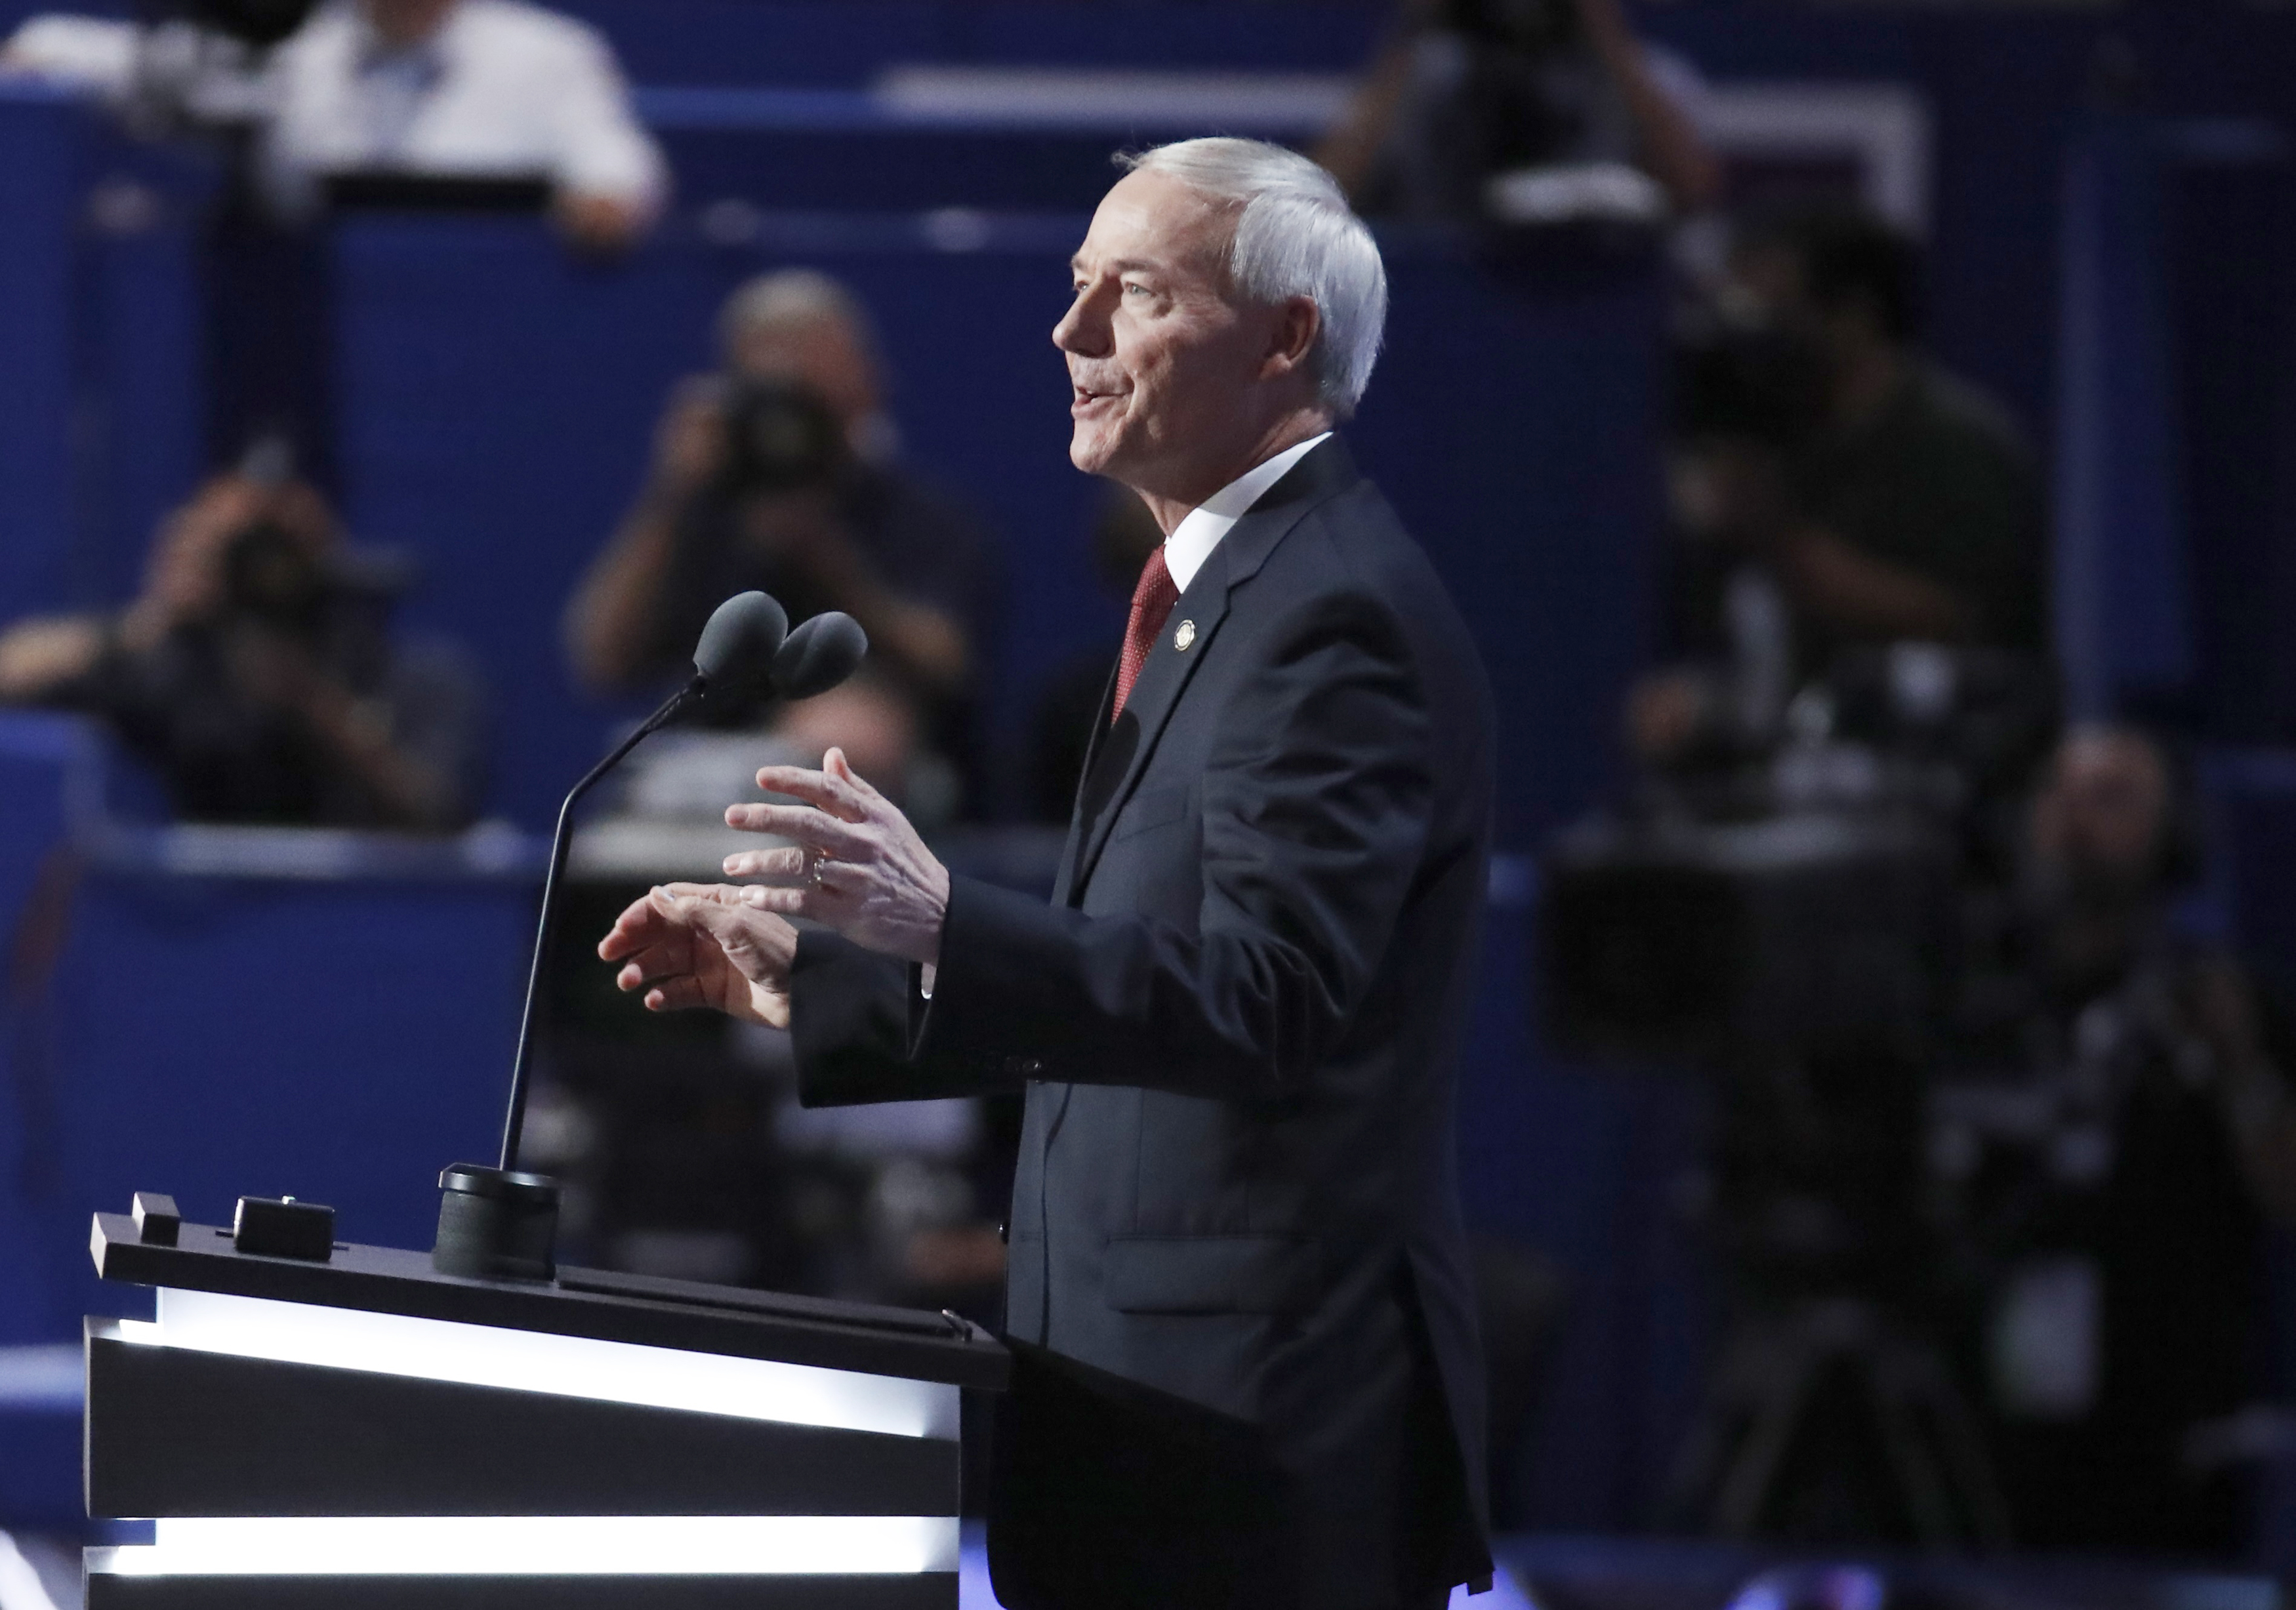 Governor Asa Hutchinson speaks at the Republican National Convention in Cleveland